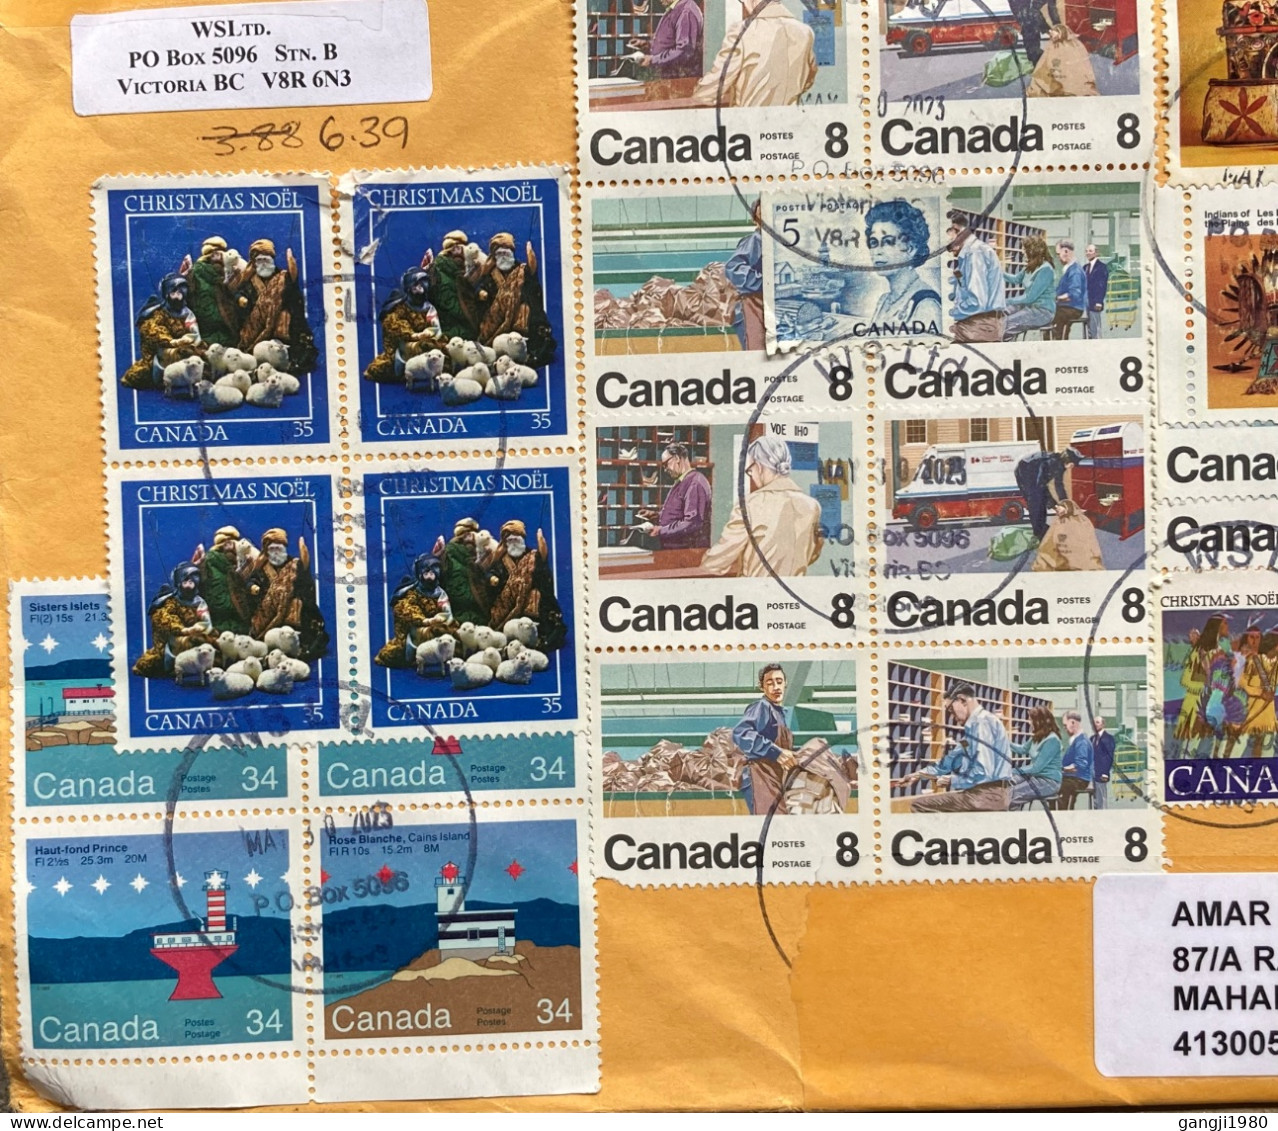 CANADA TO INDIA2023, COVER USED, ANIMAL, PAINTING, CHRISTMAS, POSTAL ACTIVITY, INDIANS, NATO, GLOBE, JULES LEGER,40 STAM - Covers & Documents